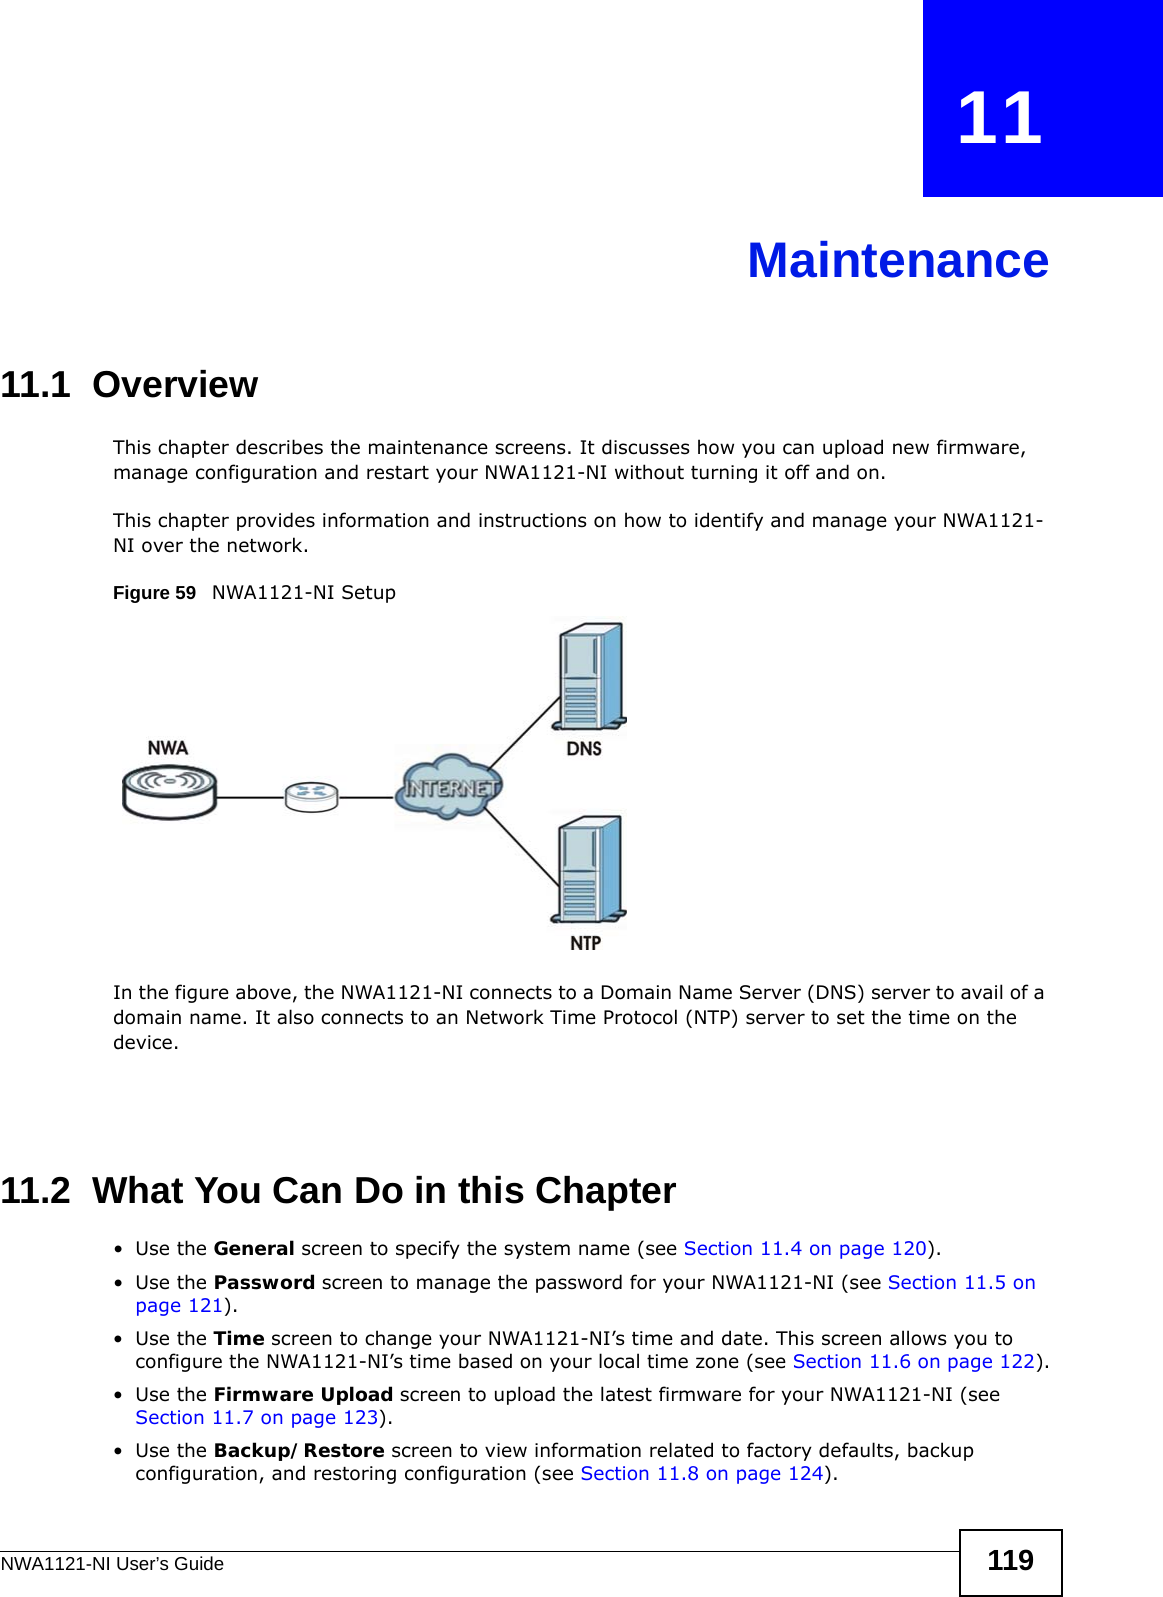 NWA1121-NI User’s Guide 119CHAPTER   11Maintenance11.1  OverviewThis chapter describes the maintenance screens. It discusses how you can upload new firmware, manage configuration and restart your NWA1121-NI without turning it off and on. This chapter provides information and instructions on how to identify and manage your NWA1121-NI over the network. Figure 59   NWA1121-NI Setup In the figure above, the NWA1121-NI connects to a Domain Name Server (DNS) server to avail of a domain name. It also connects to an Network Time Protocol (NTP) server to set the time on the device.11.2  What You Can Do in this Chapter•Use the General screen to specify the system name (see Section 11.4 on page 120).•Use the Password screen to manage the password for your NWA1121-NI (see Section 11.5 on page 121).•Use the Time screen to change your NWA1121-NI’s time and date. This screen allows you to configure the NWA1121-NI’s time based on your local time zone (see Section 11.6 on page 122).•Use the Firmware Upload screen to upload the latest firmware for your NWA1121-NI (see Section 11.7 on page 123).•Use the Backup/Restore screen to view information related to factory defaults, backup configuration, and restoring configuration (see Section 11.8 on page 124).